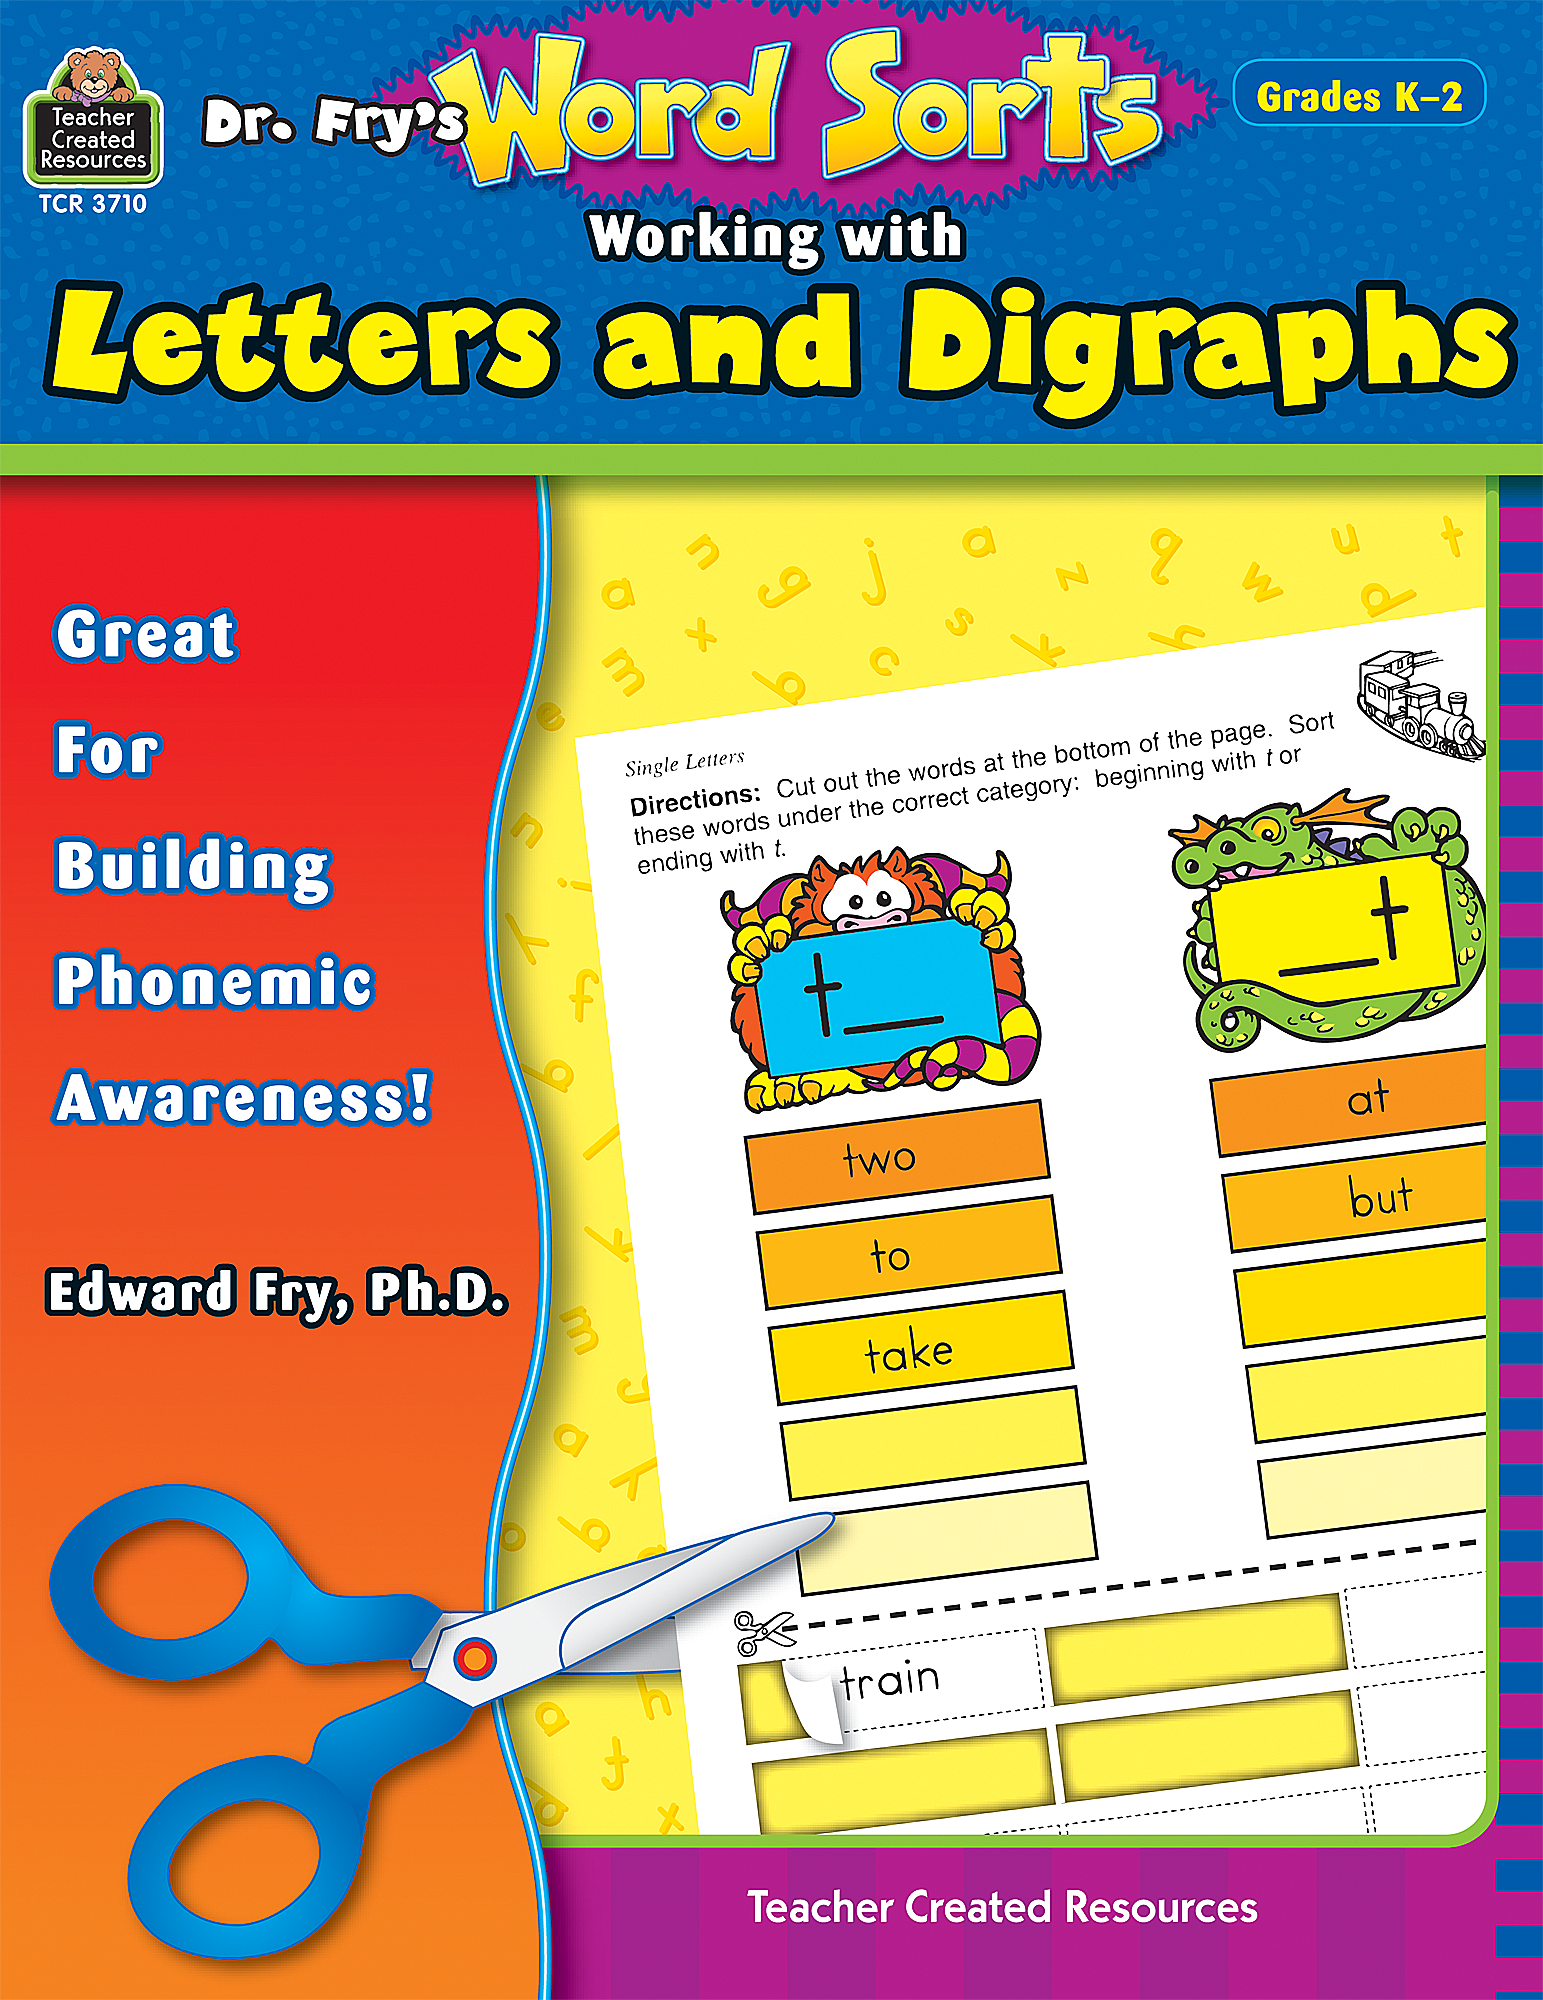 word words sorts dr way working sort fry letters created teacher